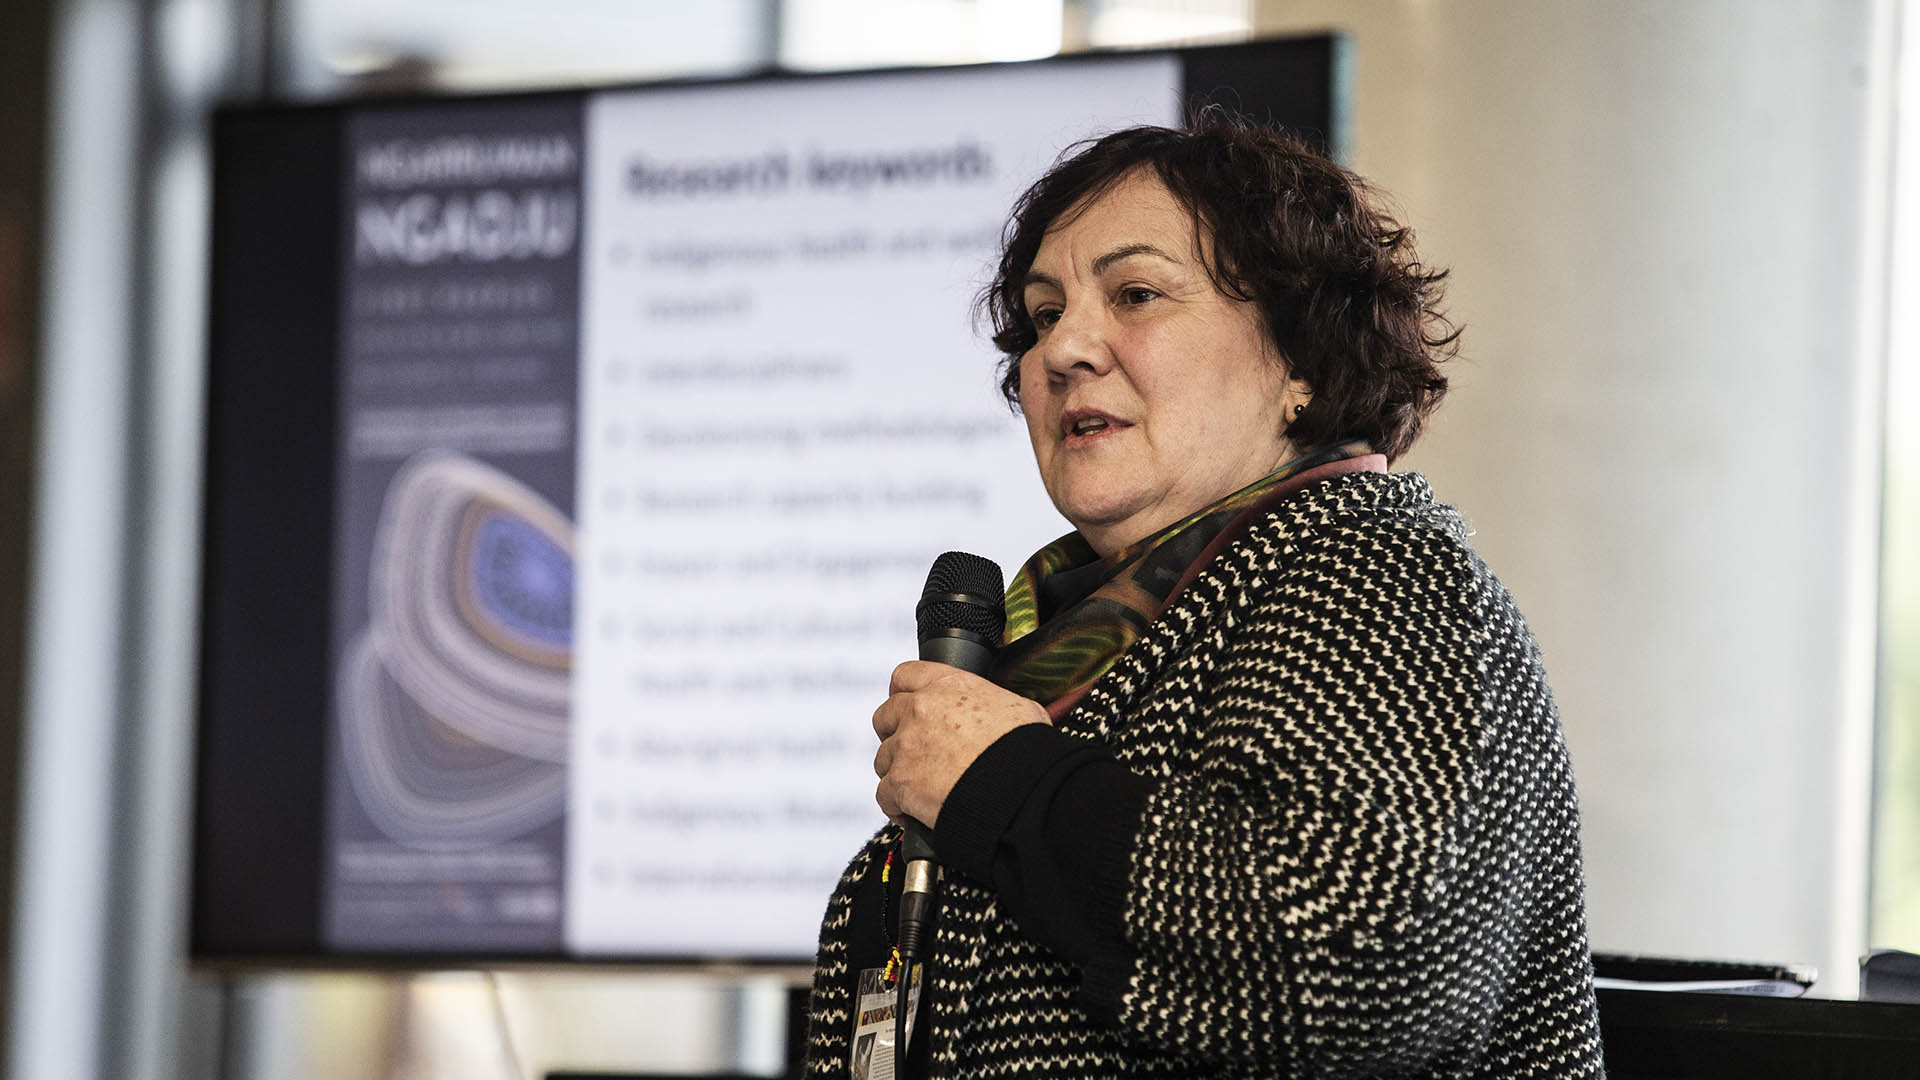 Dr Kathleen Clapham, Professor of Indigenous Health at the University of Wollongong’s Ngarruwan Ngadju First Peoples Health and Wellbeing Research Centre